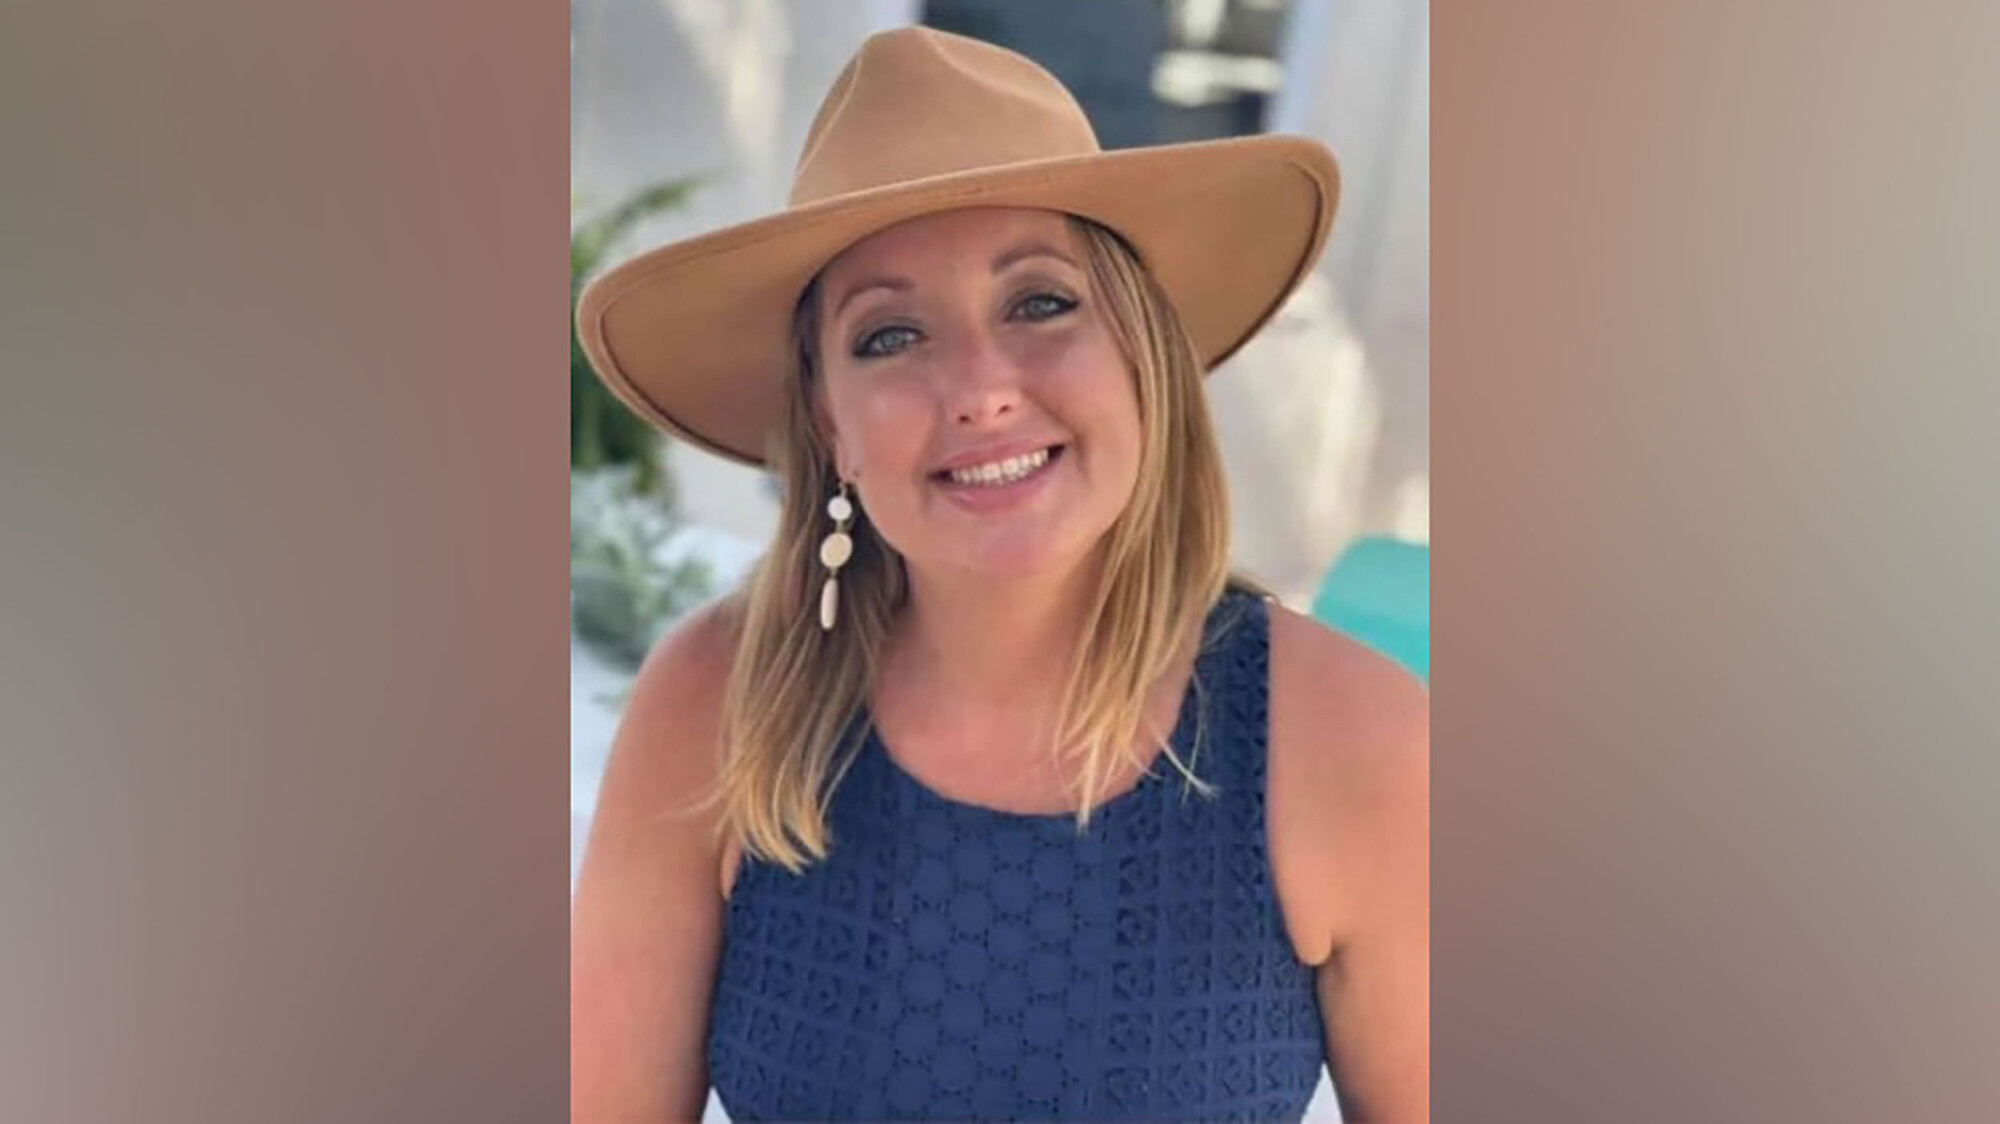 Body of Missing 37-Year-Old Florida Mom Found in Shallow Alabama Grave